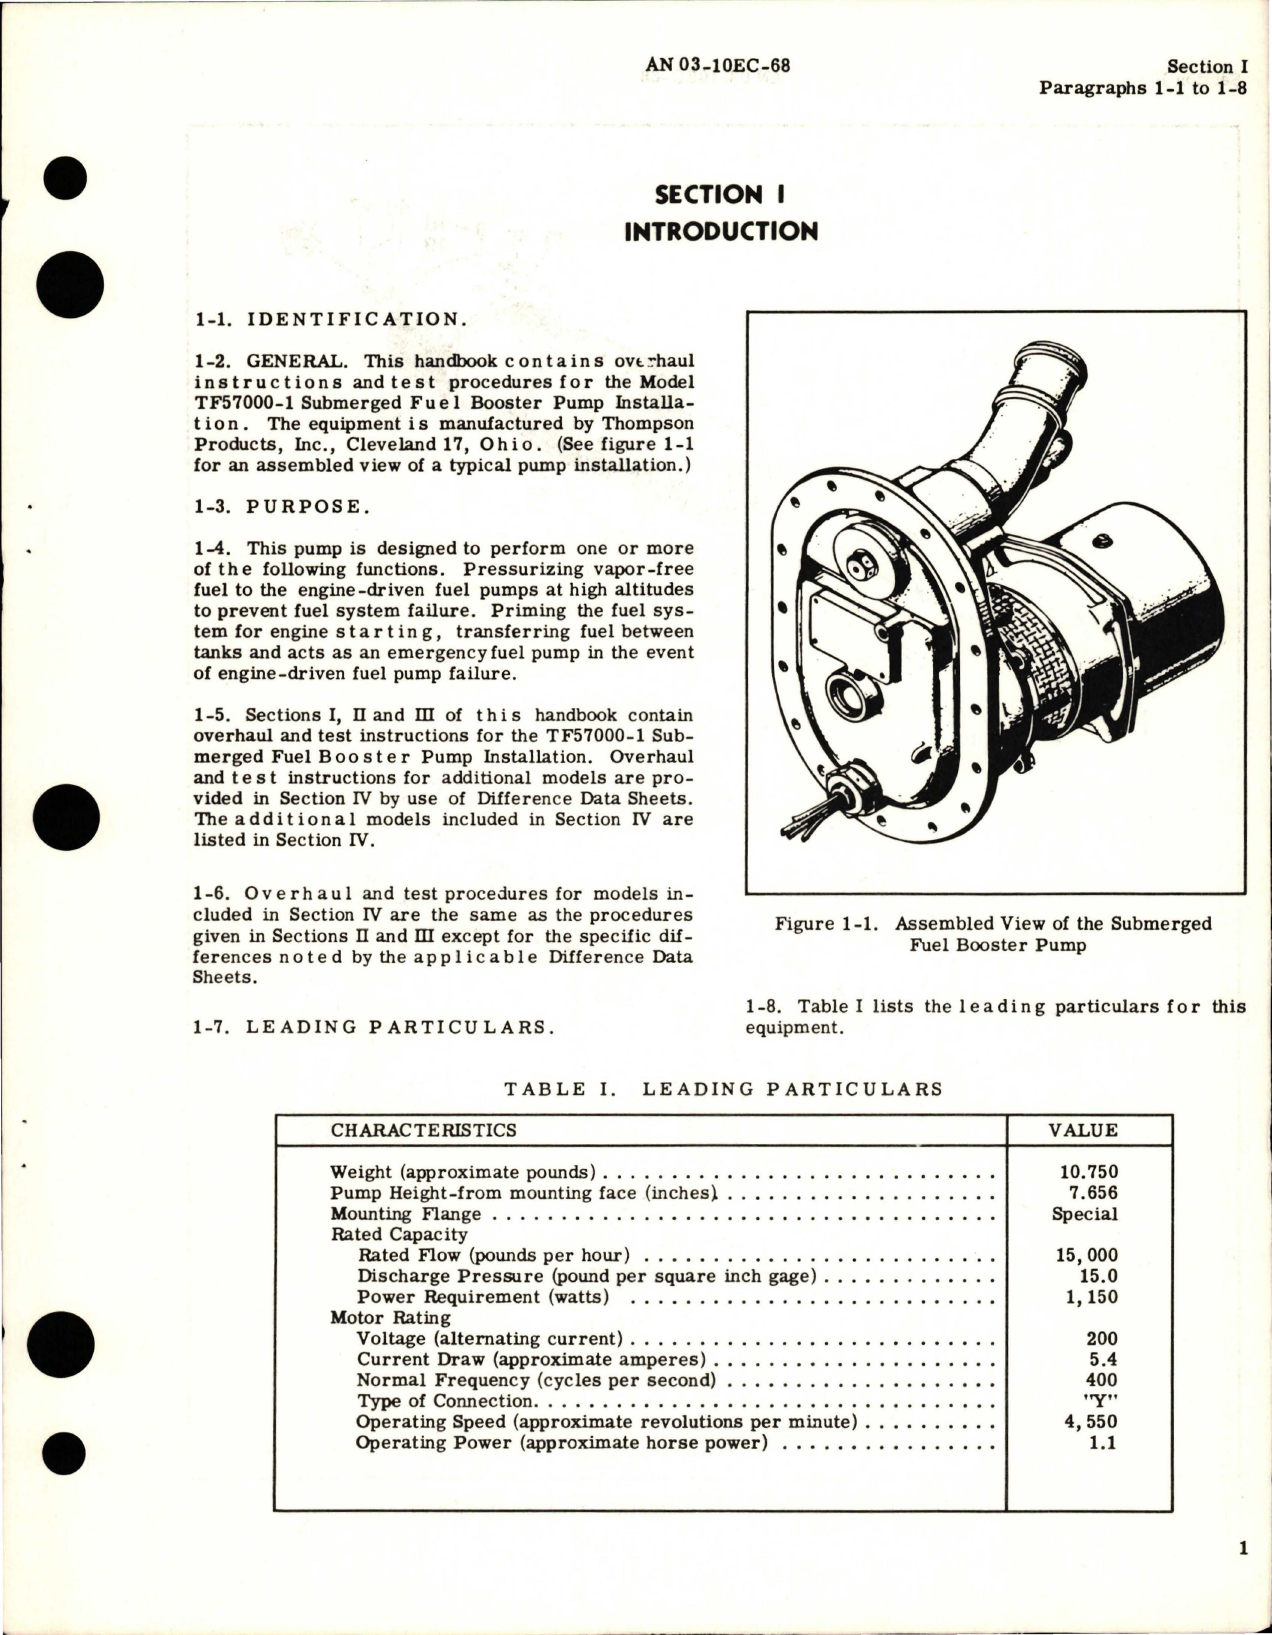 Sample page 5 from AirCorps Library document: Overhaul Instructions for Submerged Fuel Booster Pump - TF57000-1, TF59700 and TF59700-1 